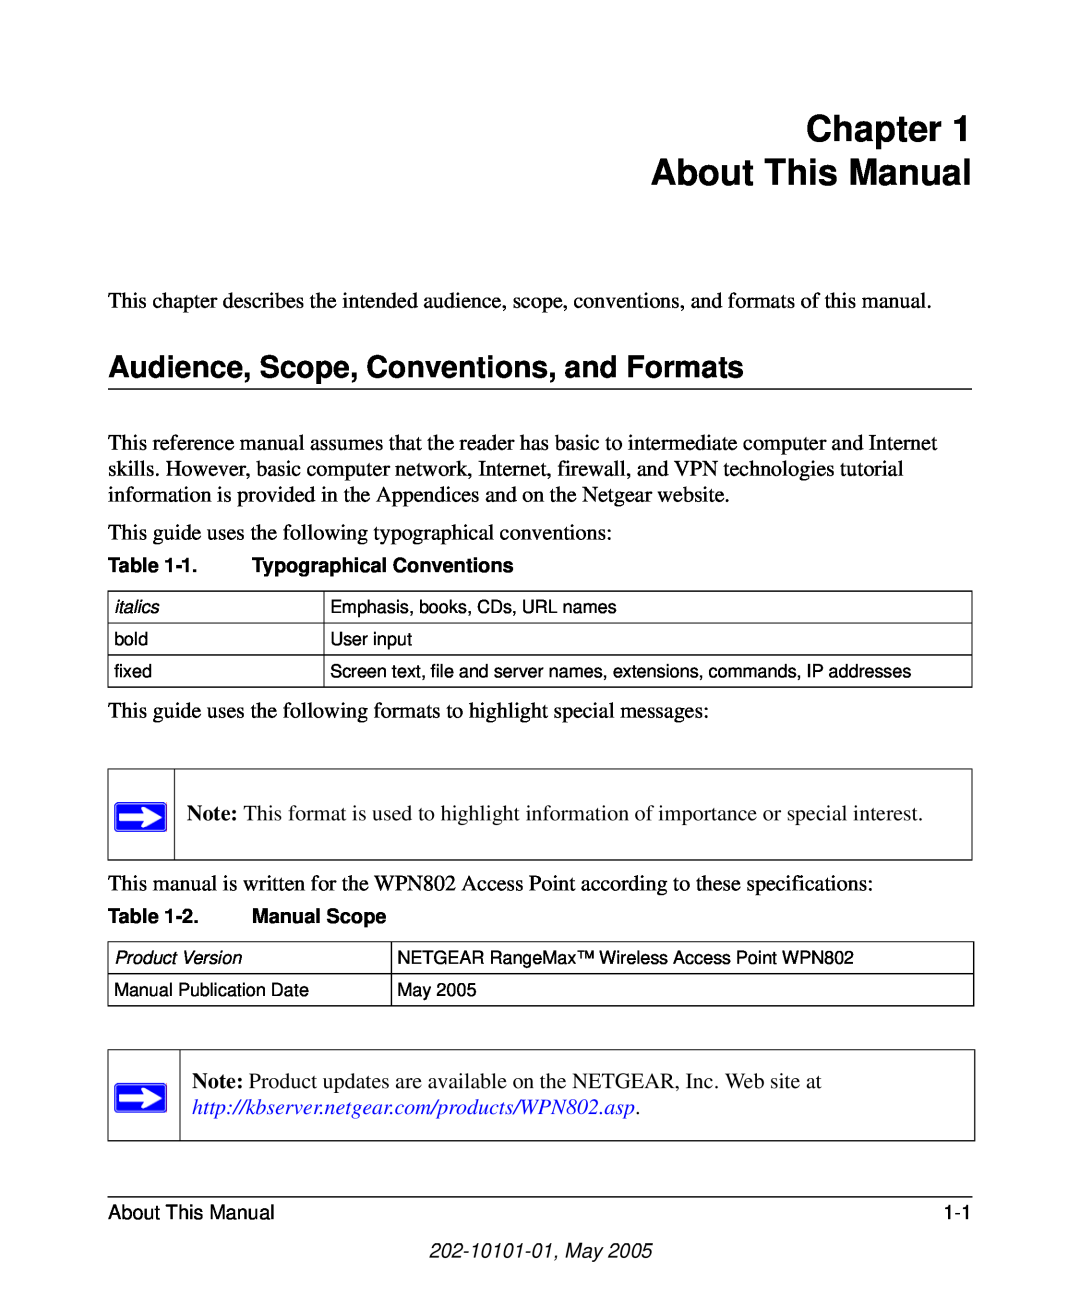 NETGEAR WPN802 manual Chapter About This Manual, Audience, Scope, Conventions, and Formats 